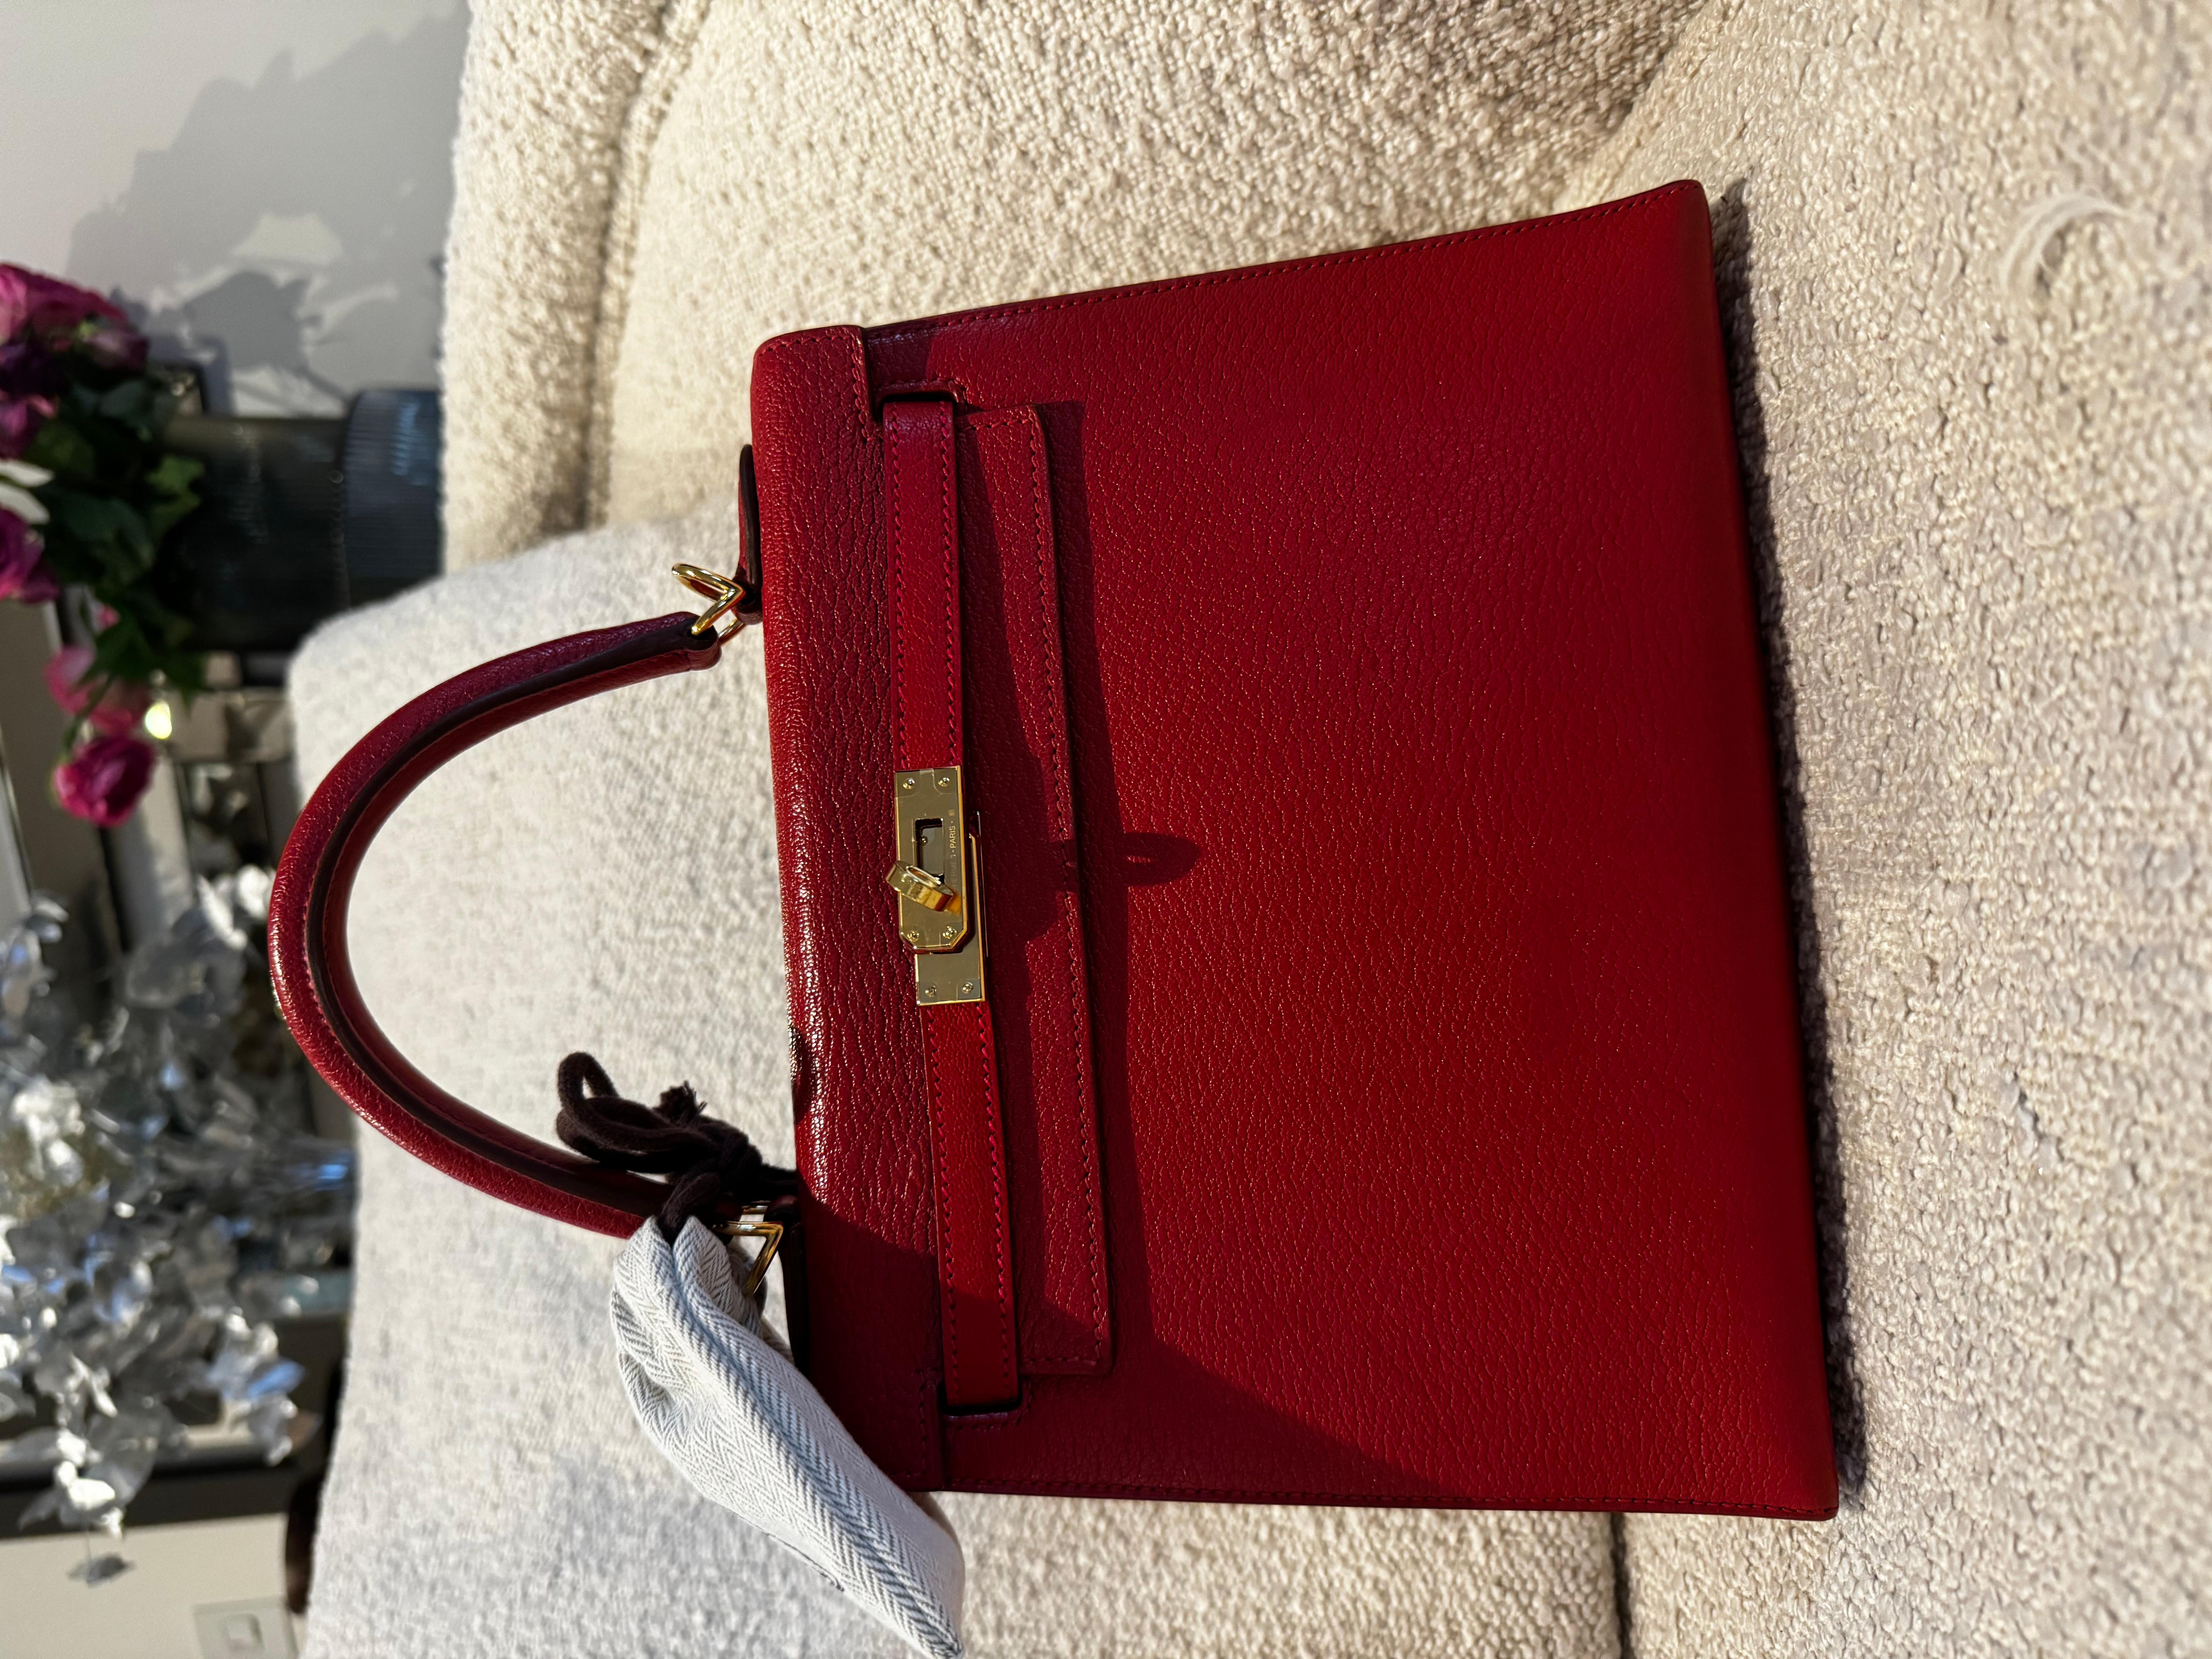 Hermes Kelly 25 Red VERMILLON CHÈVRE LEATHER SELLIER WITH GOLD HARDWARE Bag.
HERMÈS, 2008
25 w x 18 h x 9 d cm
includes dustbag, lock, keys, clochette, shoulder strap and leather card, Hermes spa and auction receipt. 

